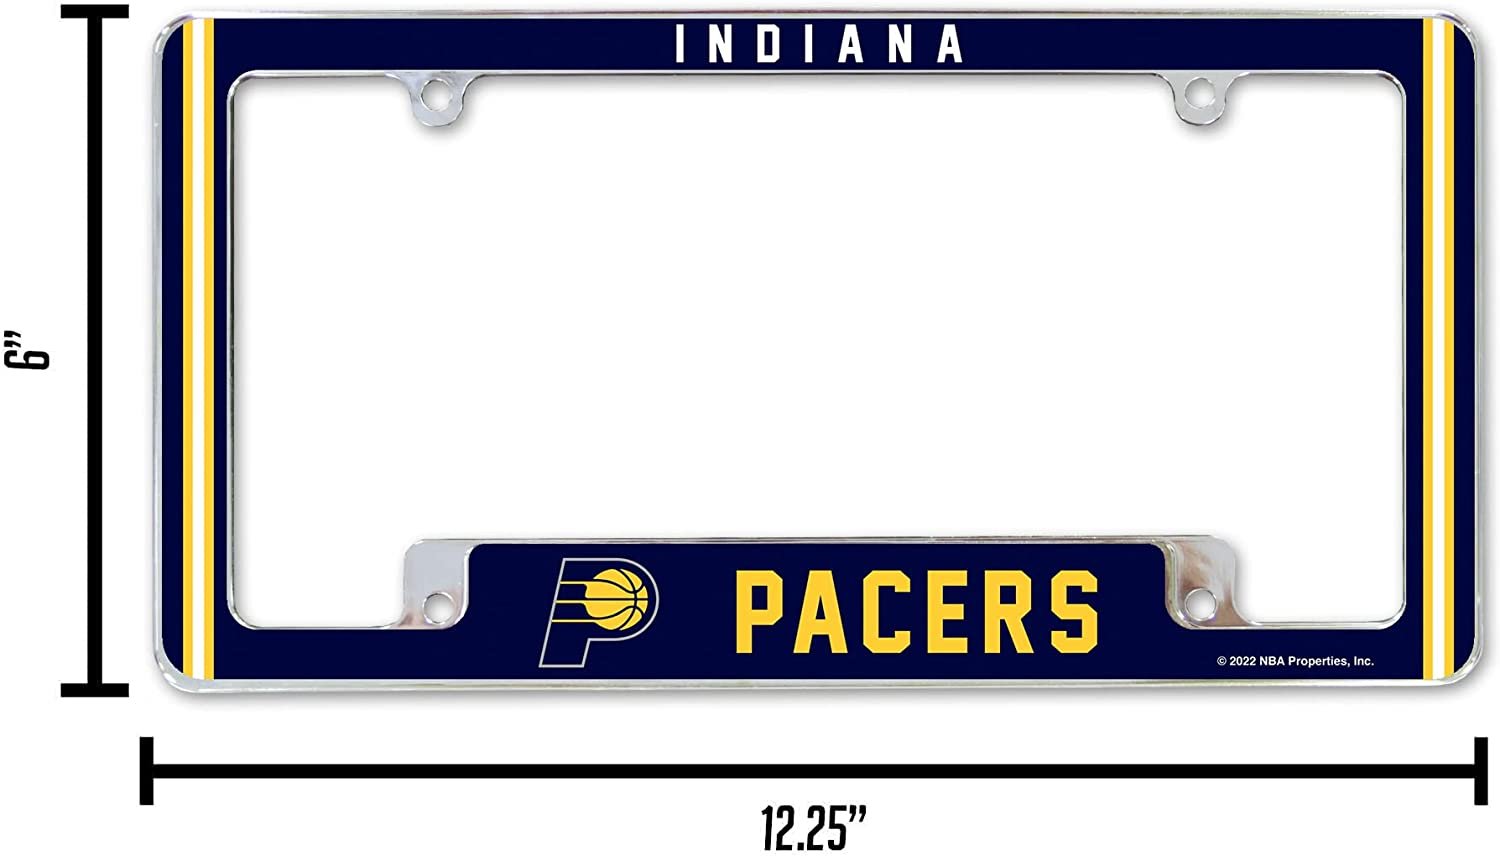 Indiana Pacers Metal License Plate Frame Chrome Tag Cover Alternate Design 6x12 Inch